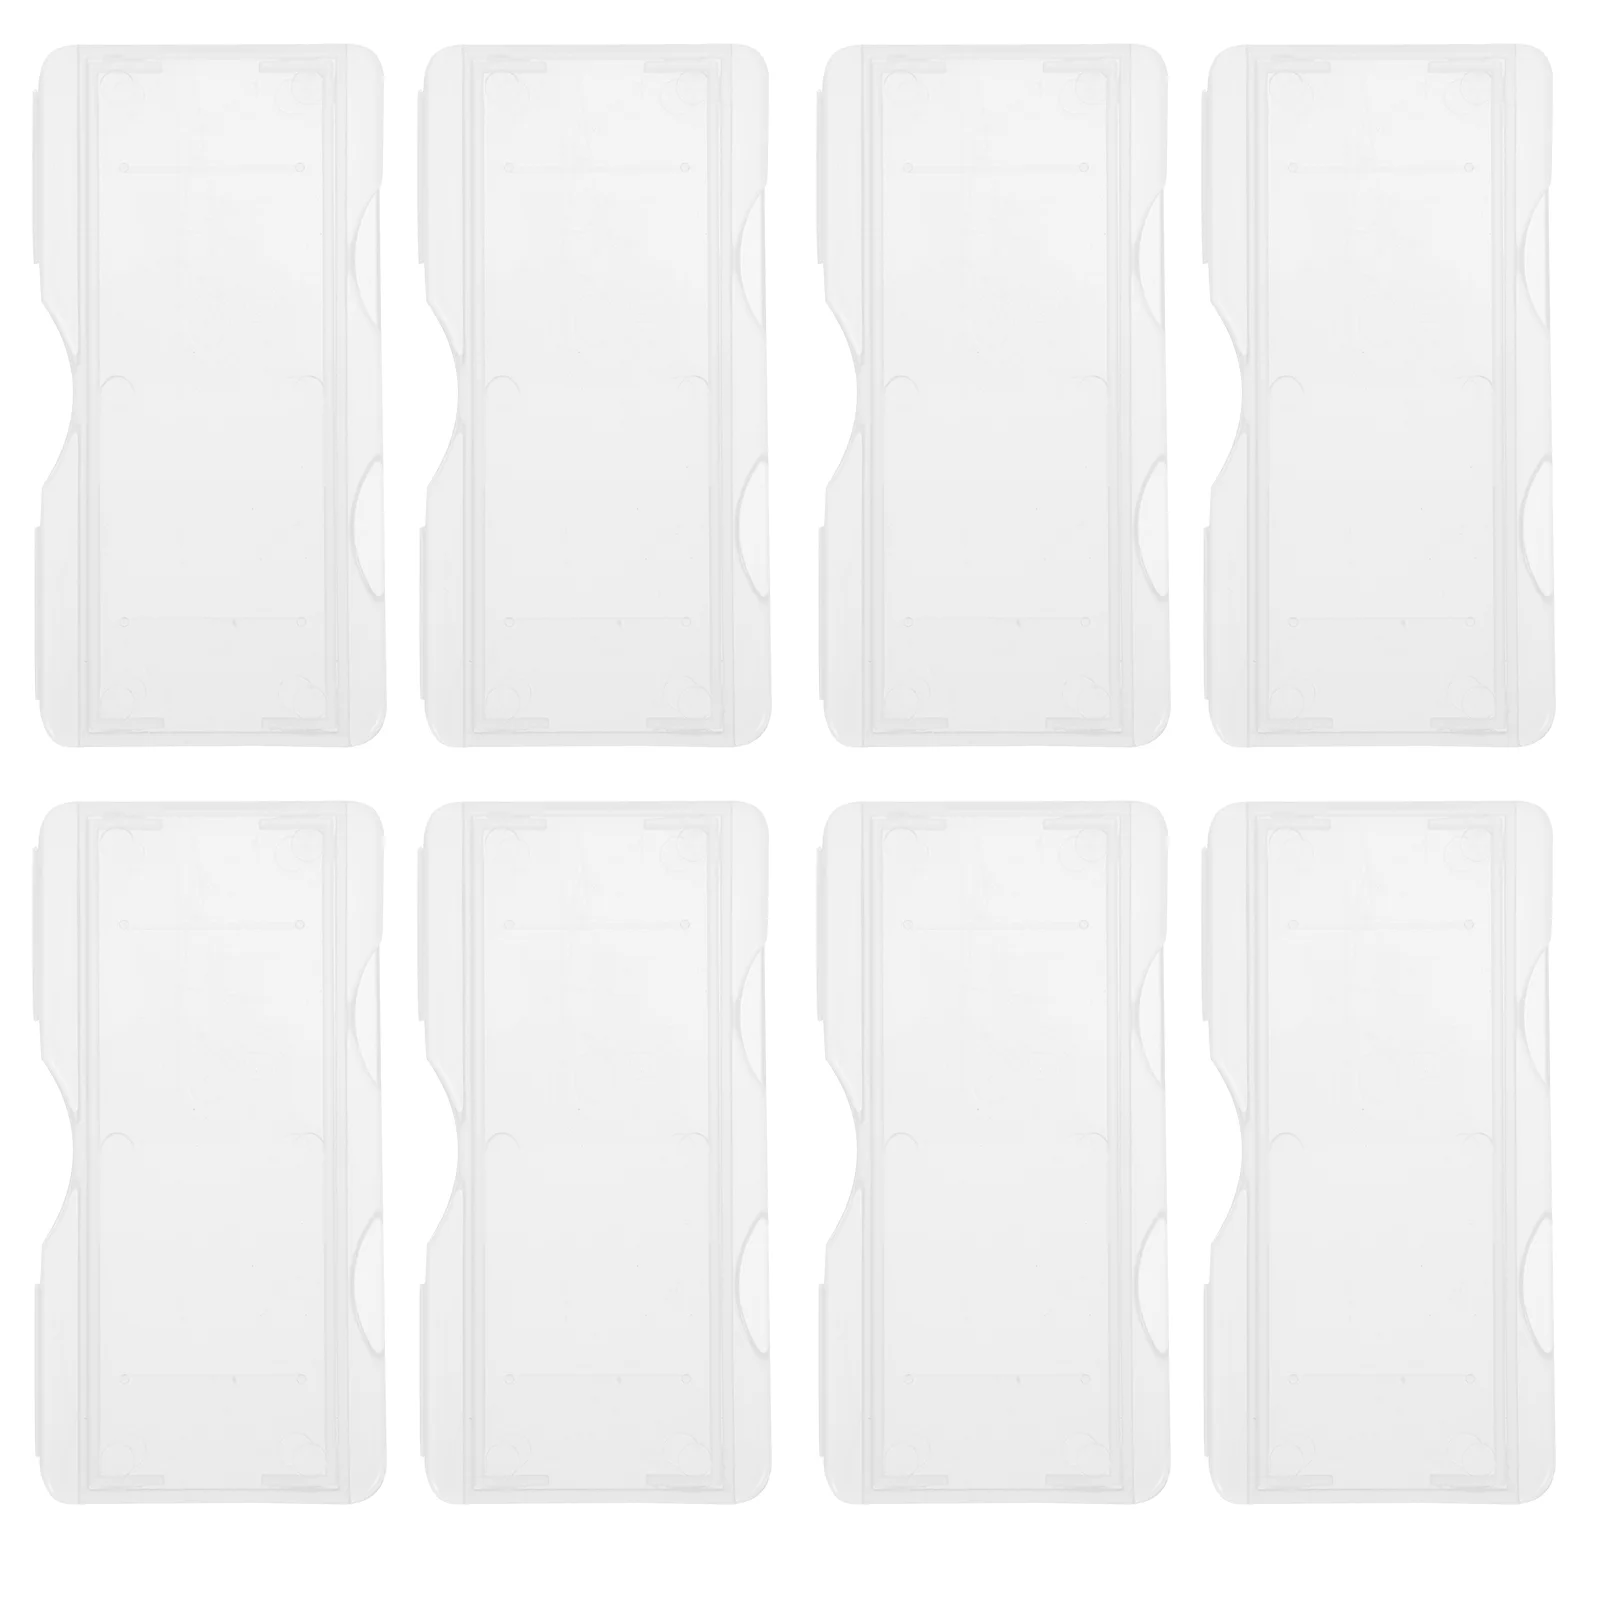 

White Microscope Slide Bag Set: 100Pcs Science Slides Container Slide Storage Box Lab Containers